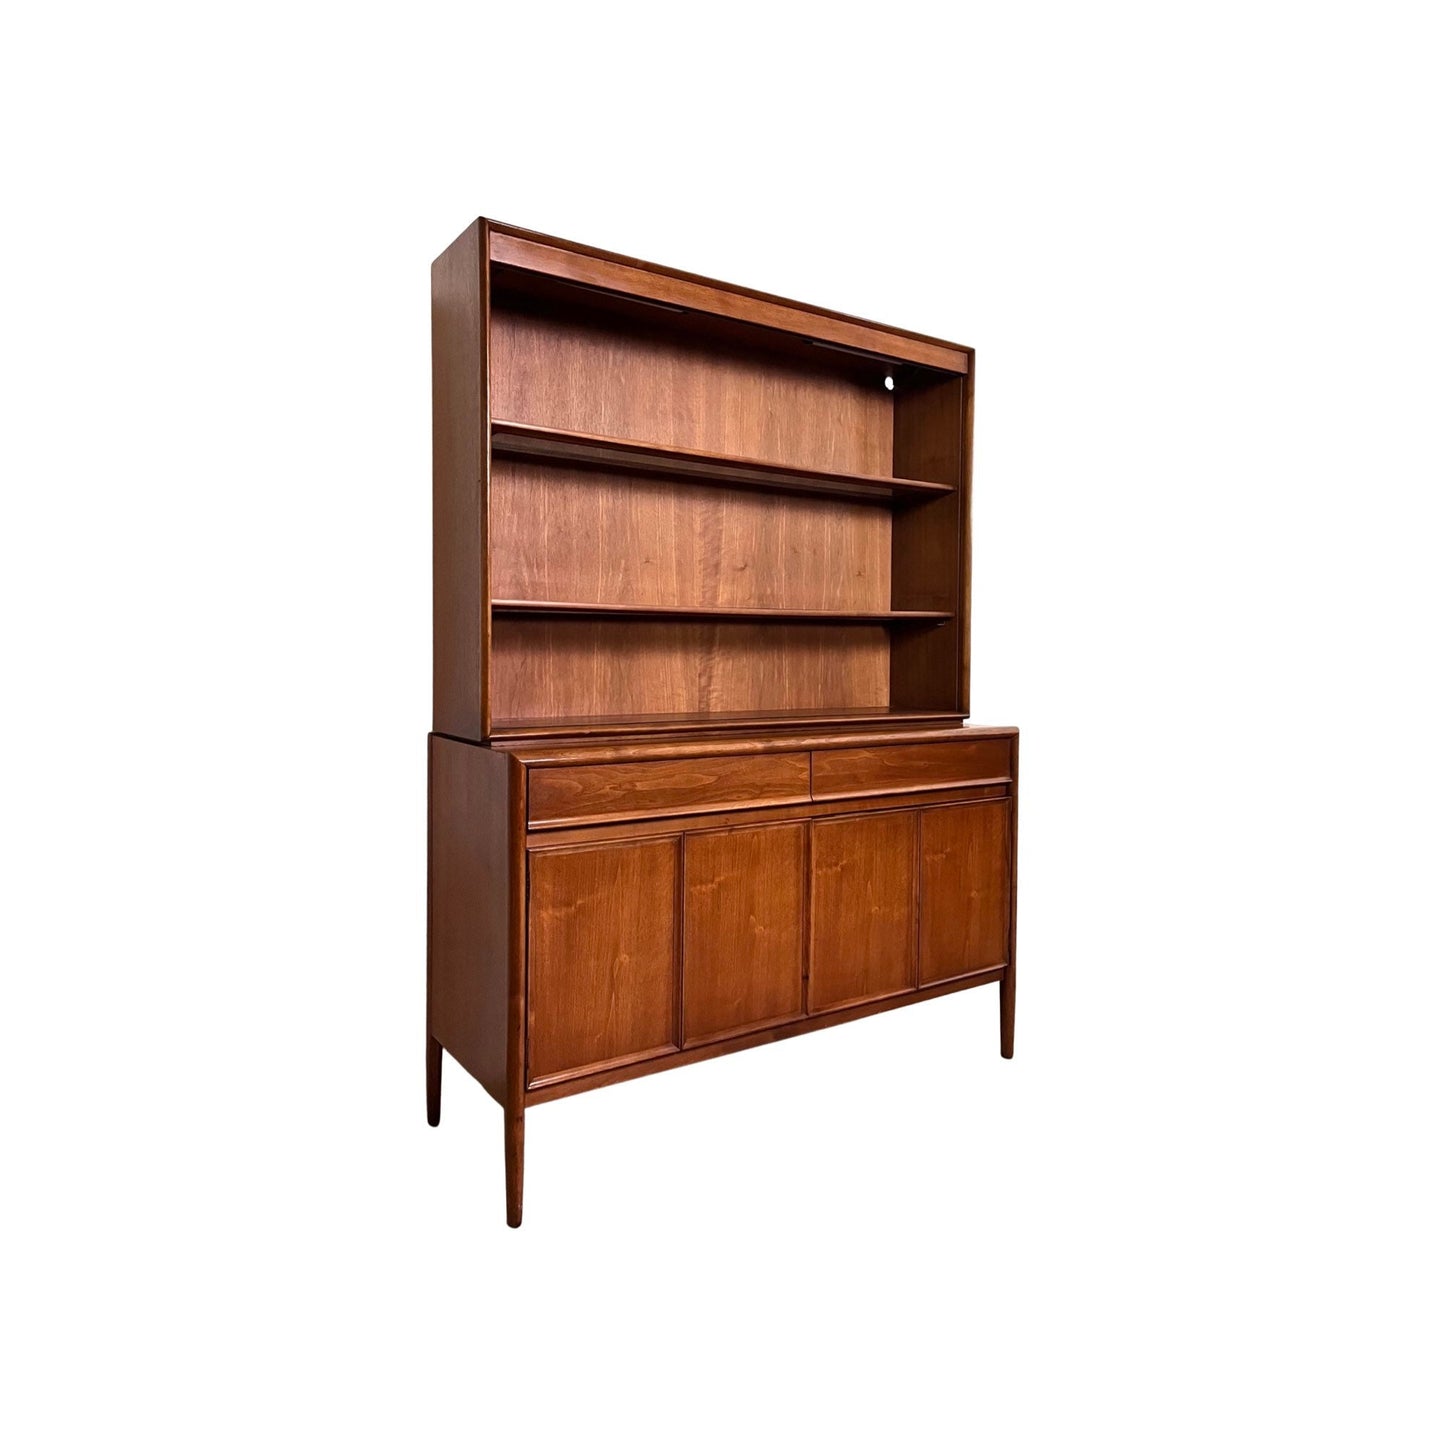 Barney Flagg for Drexel Parallel Mid Century Modern Credenza Sideboard Buffet and Hutch c. 1960s